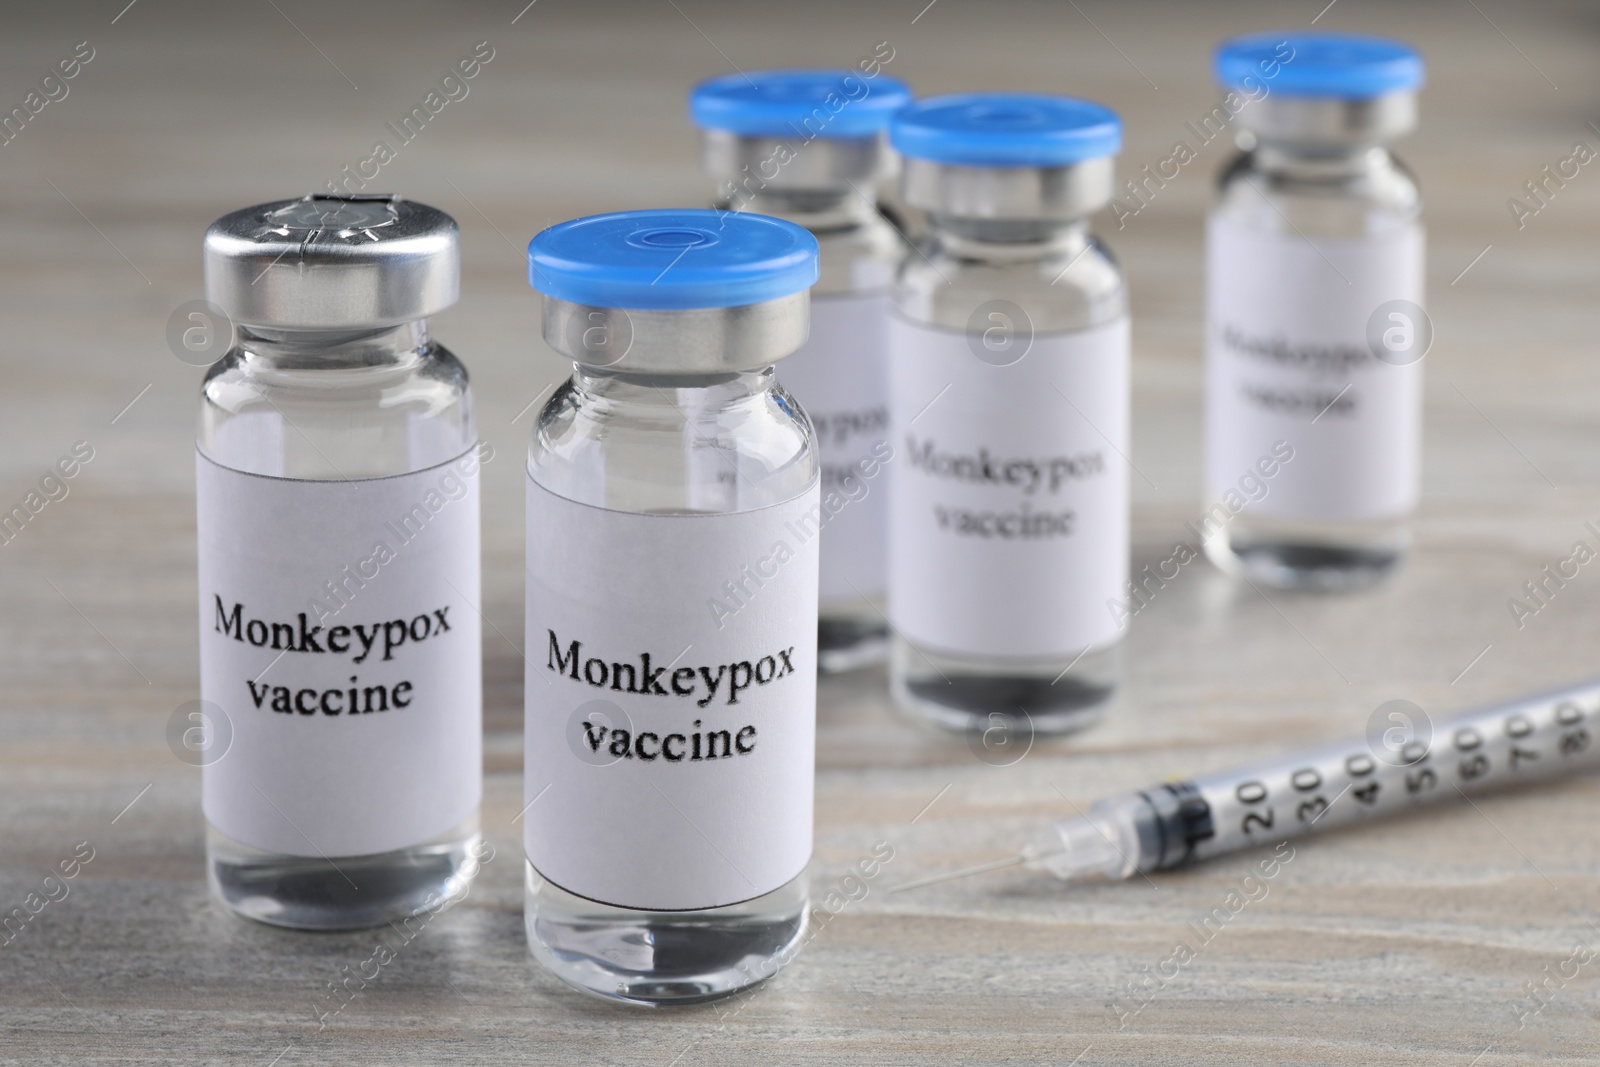 Photo of Monkeypox vaccine in glass vials and syringe on wooden table